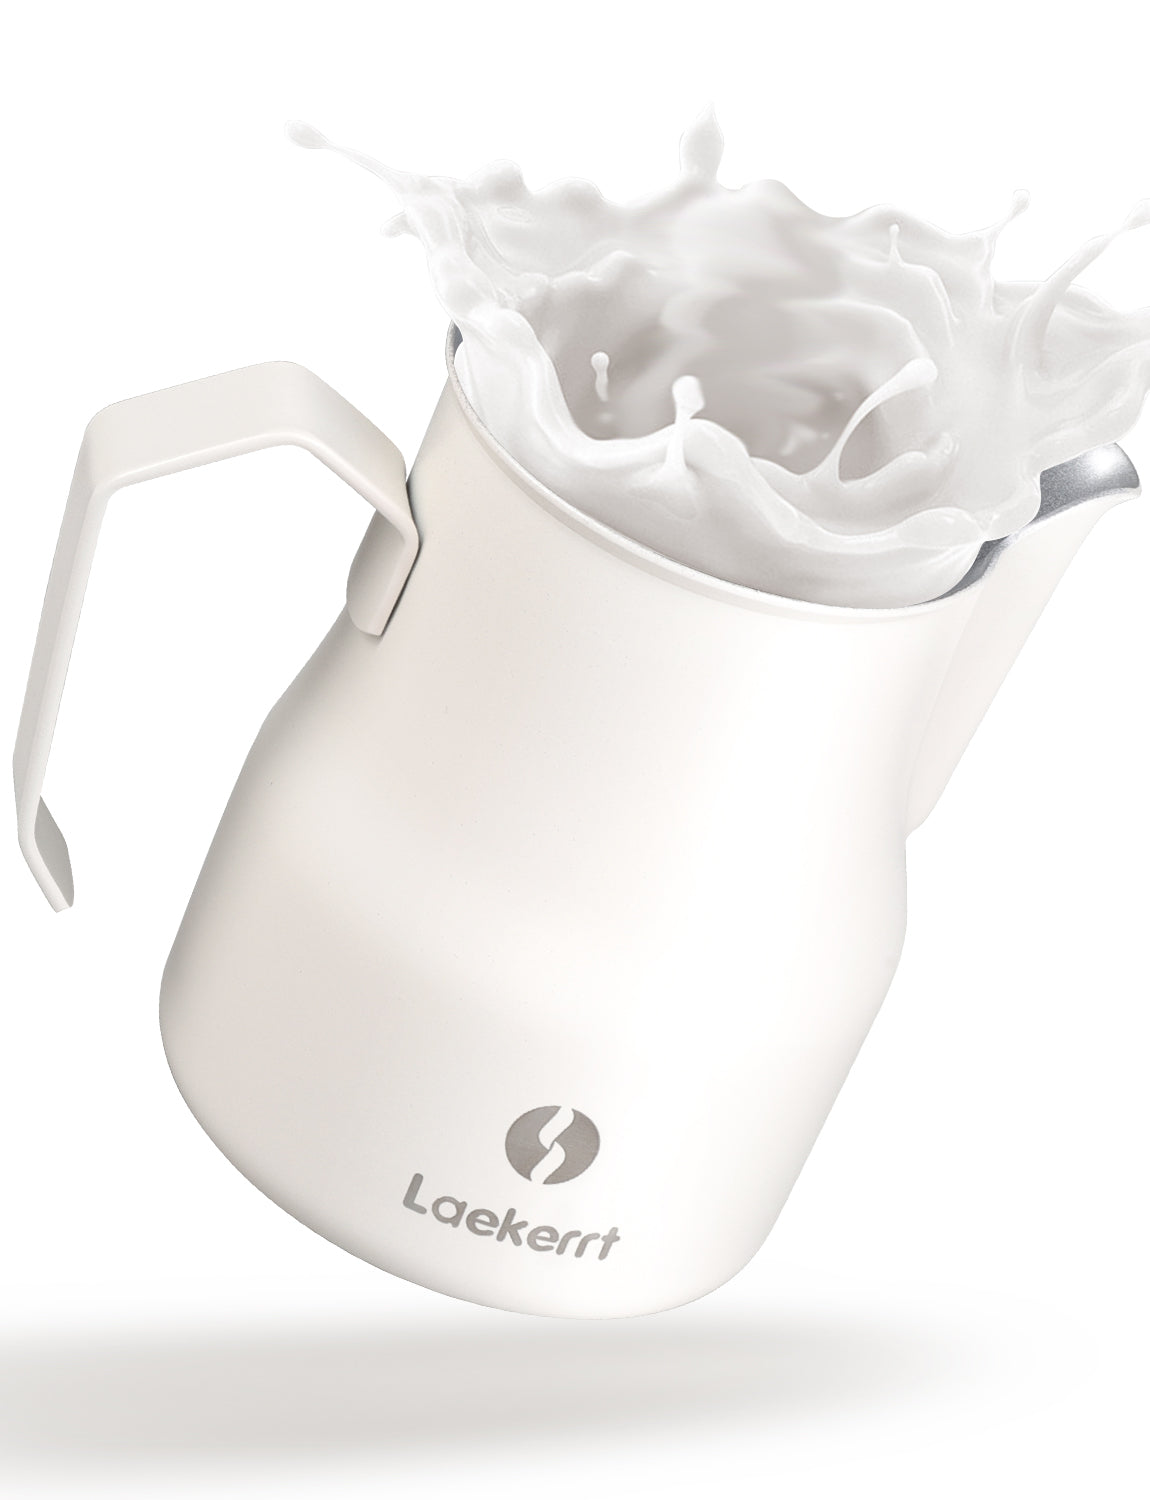 Lafeeca Espresso Cup Milk Frother Pitcher 2 in 1 Combo Set